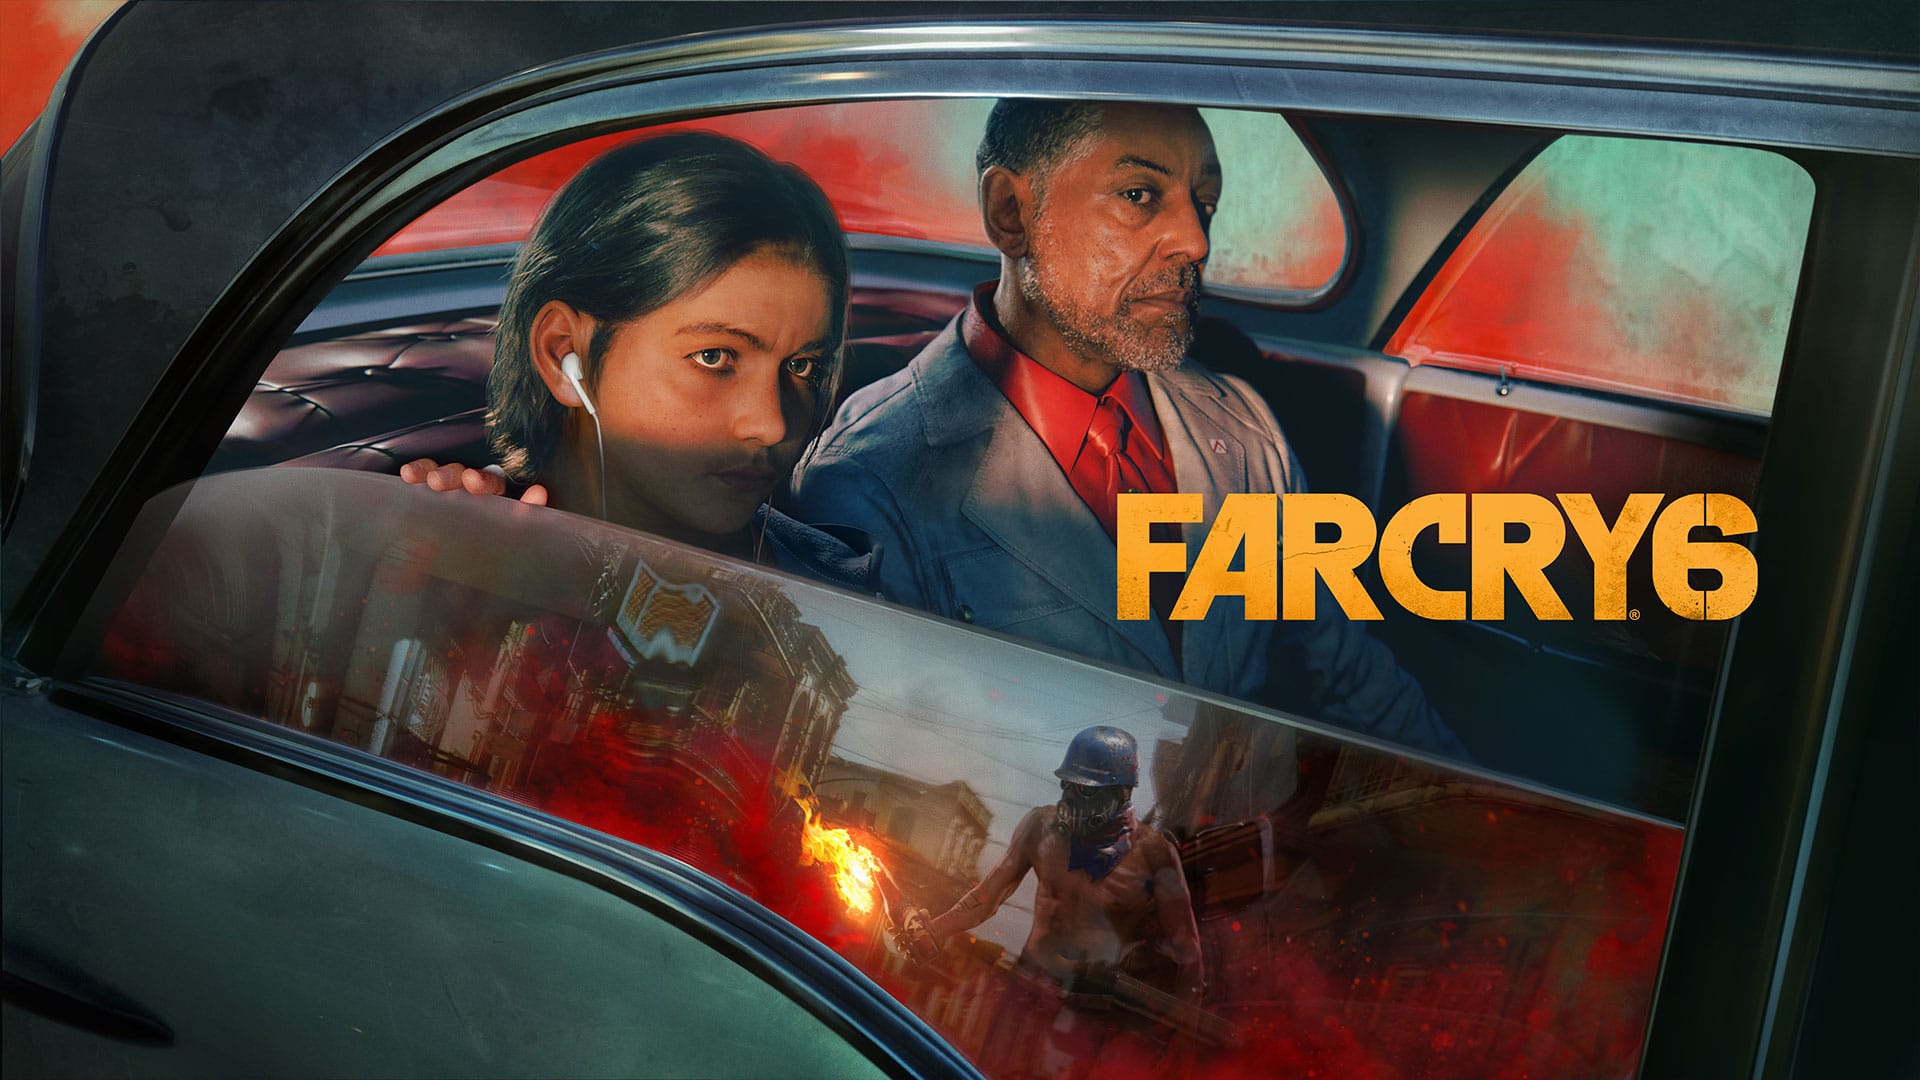 Farcry 6 Poster 9784